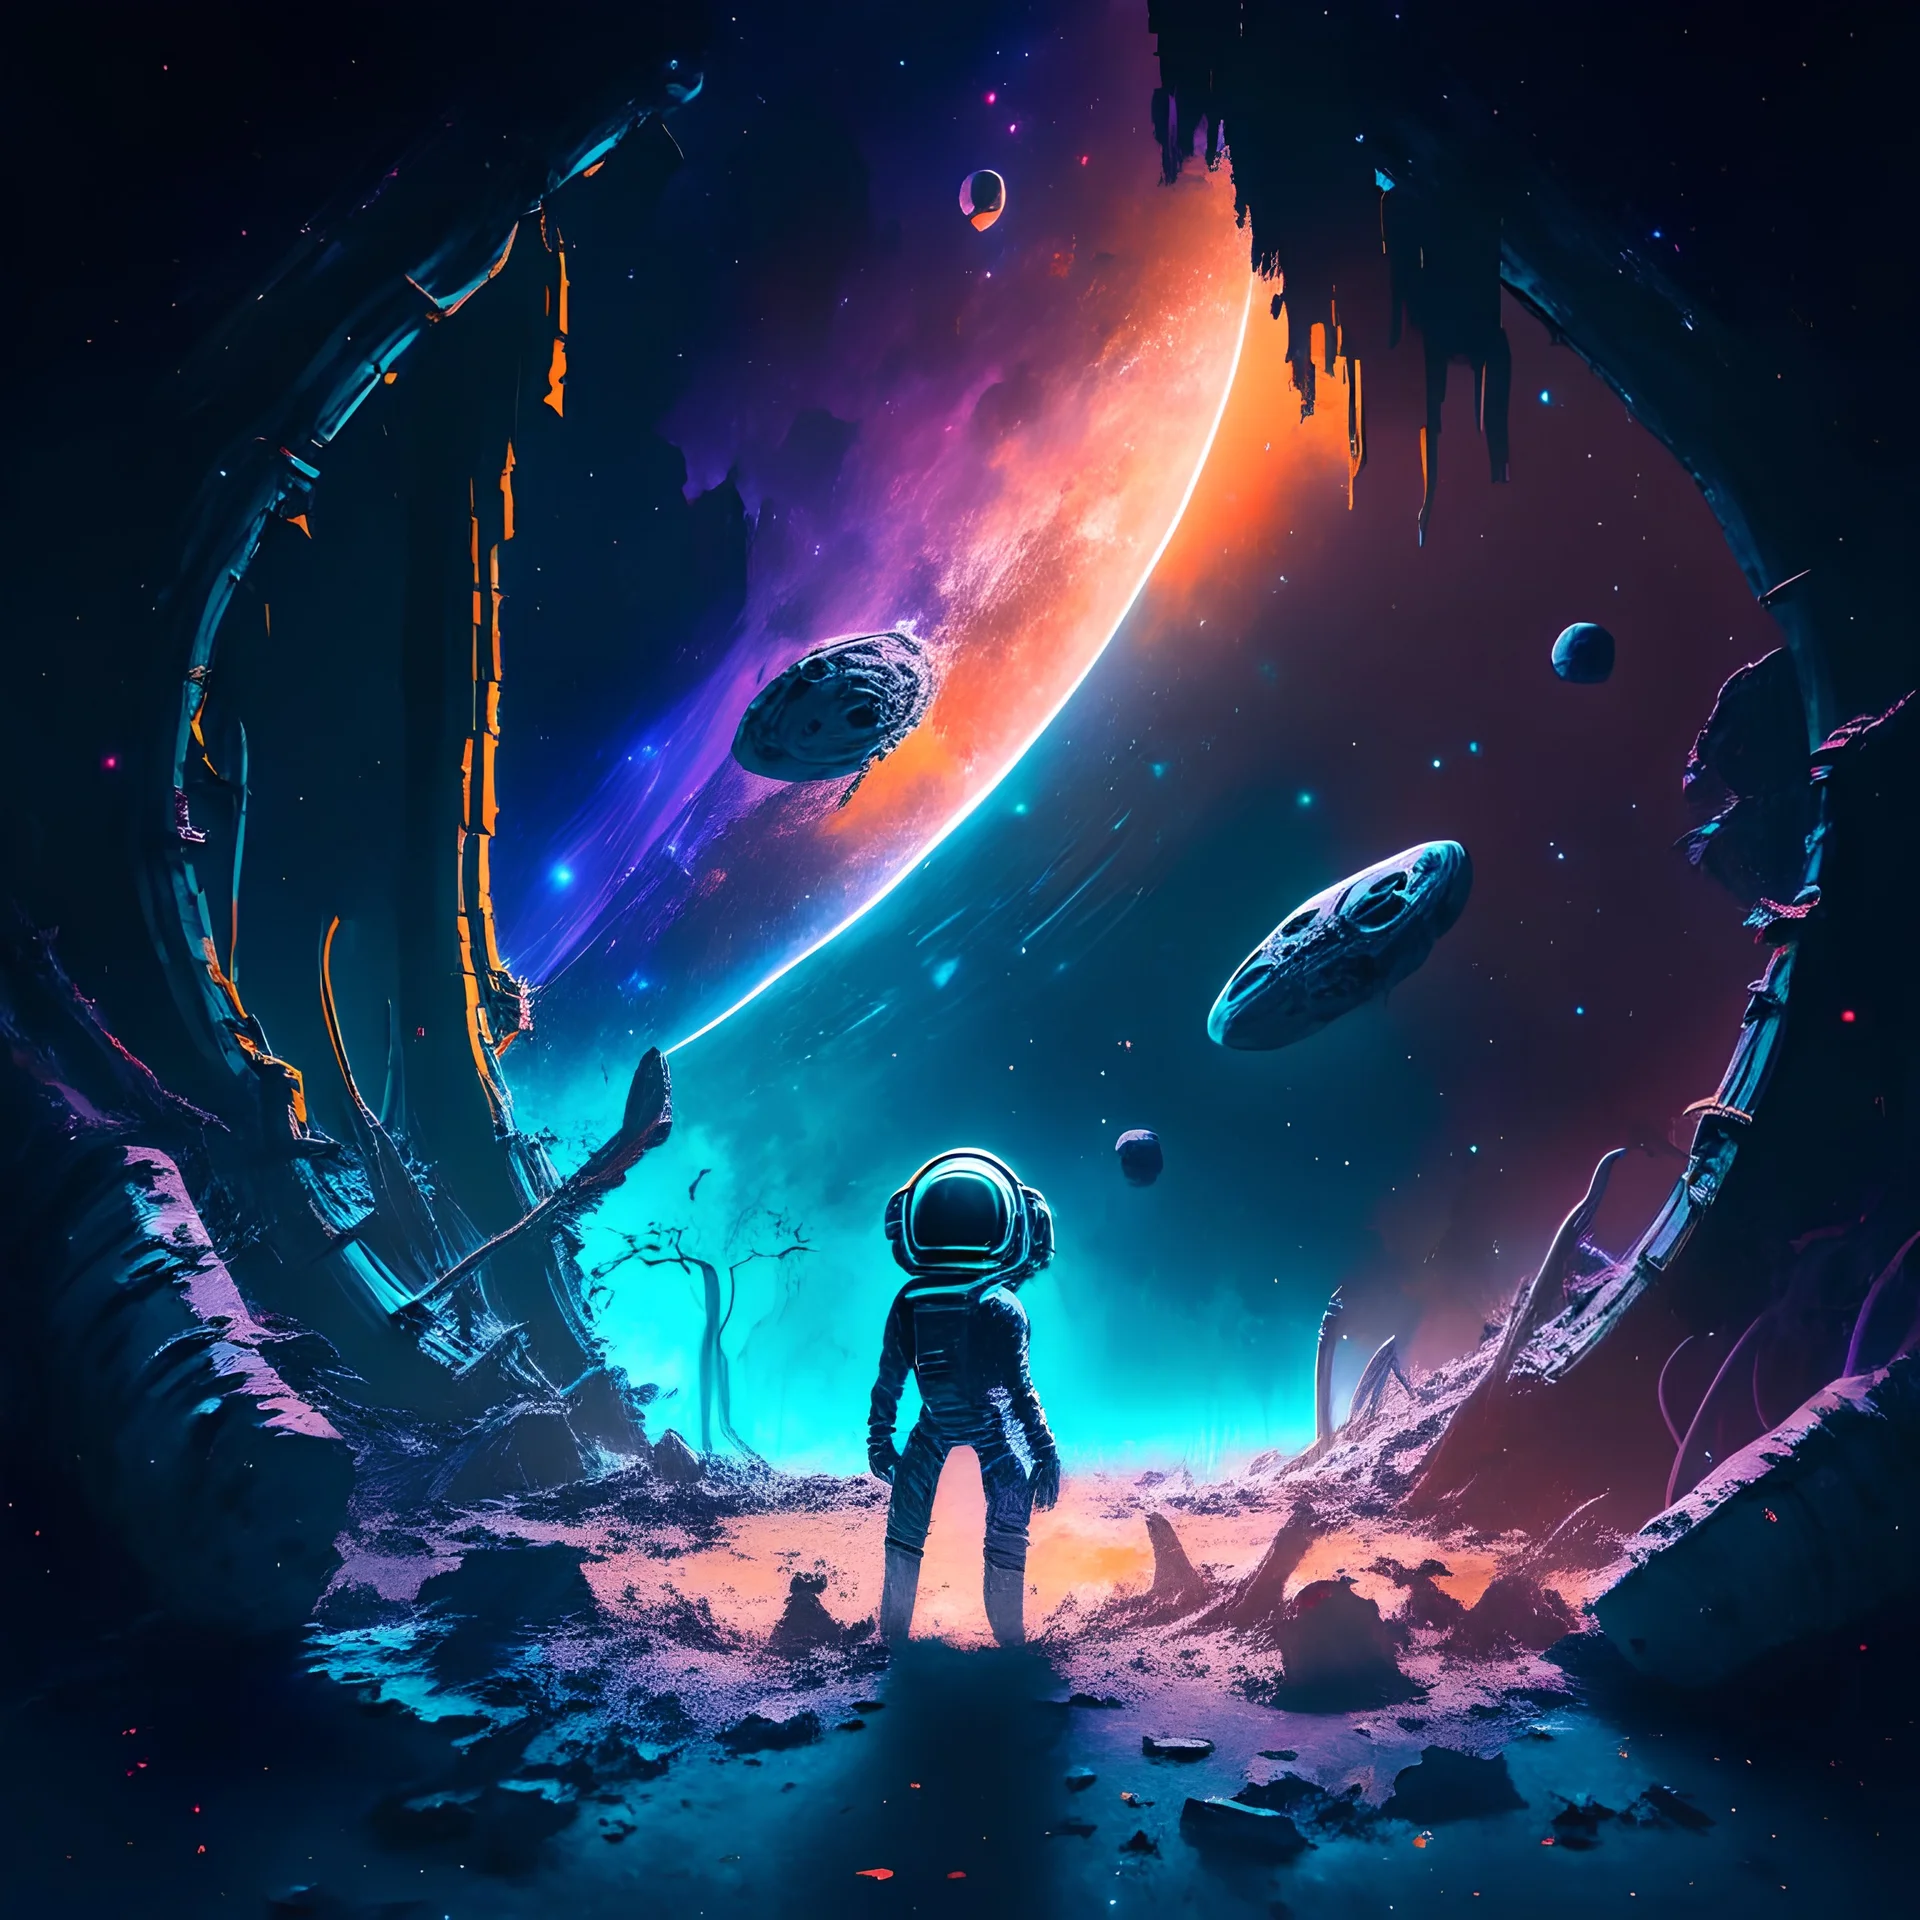 Digital Painting, dark, starry background with a central image of a perplexed astronaut floating in space, surrounded by abandoned alien ruins, Surrealism